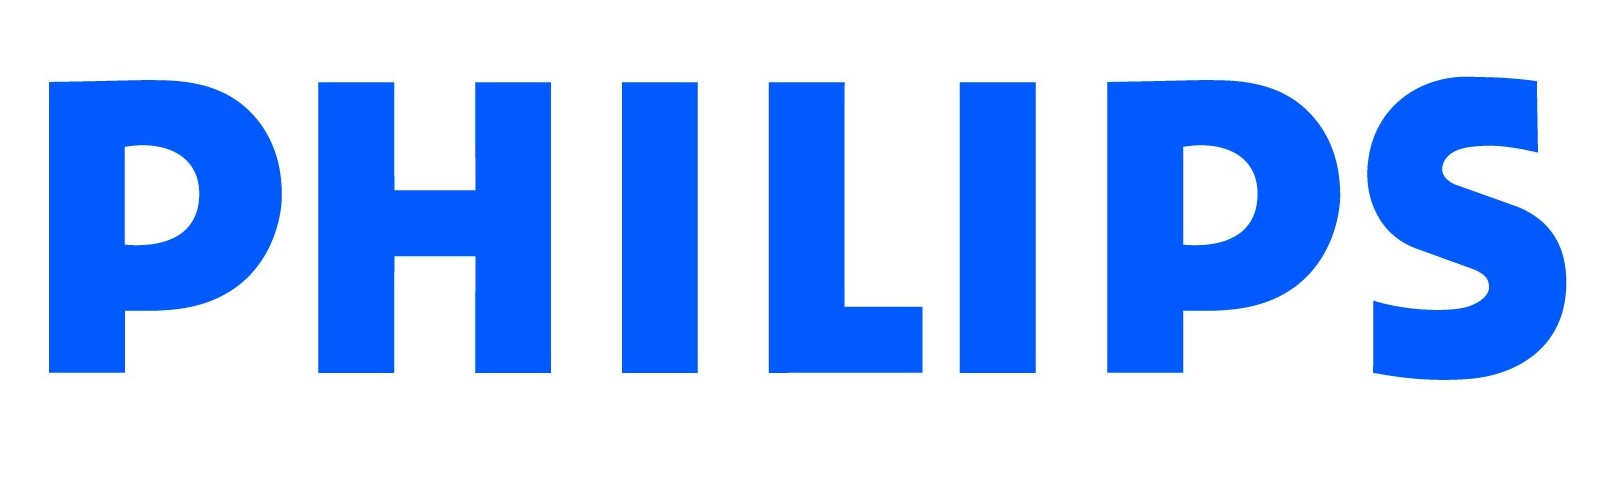 http://www.ranklogos.com/wp-content/uploads/2014/11/Philips-logo.png